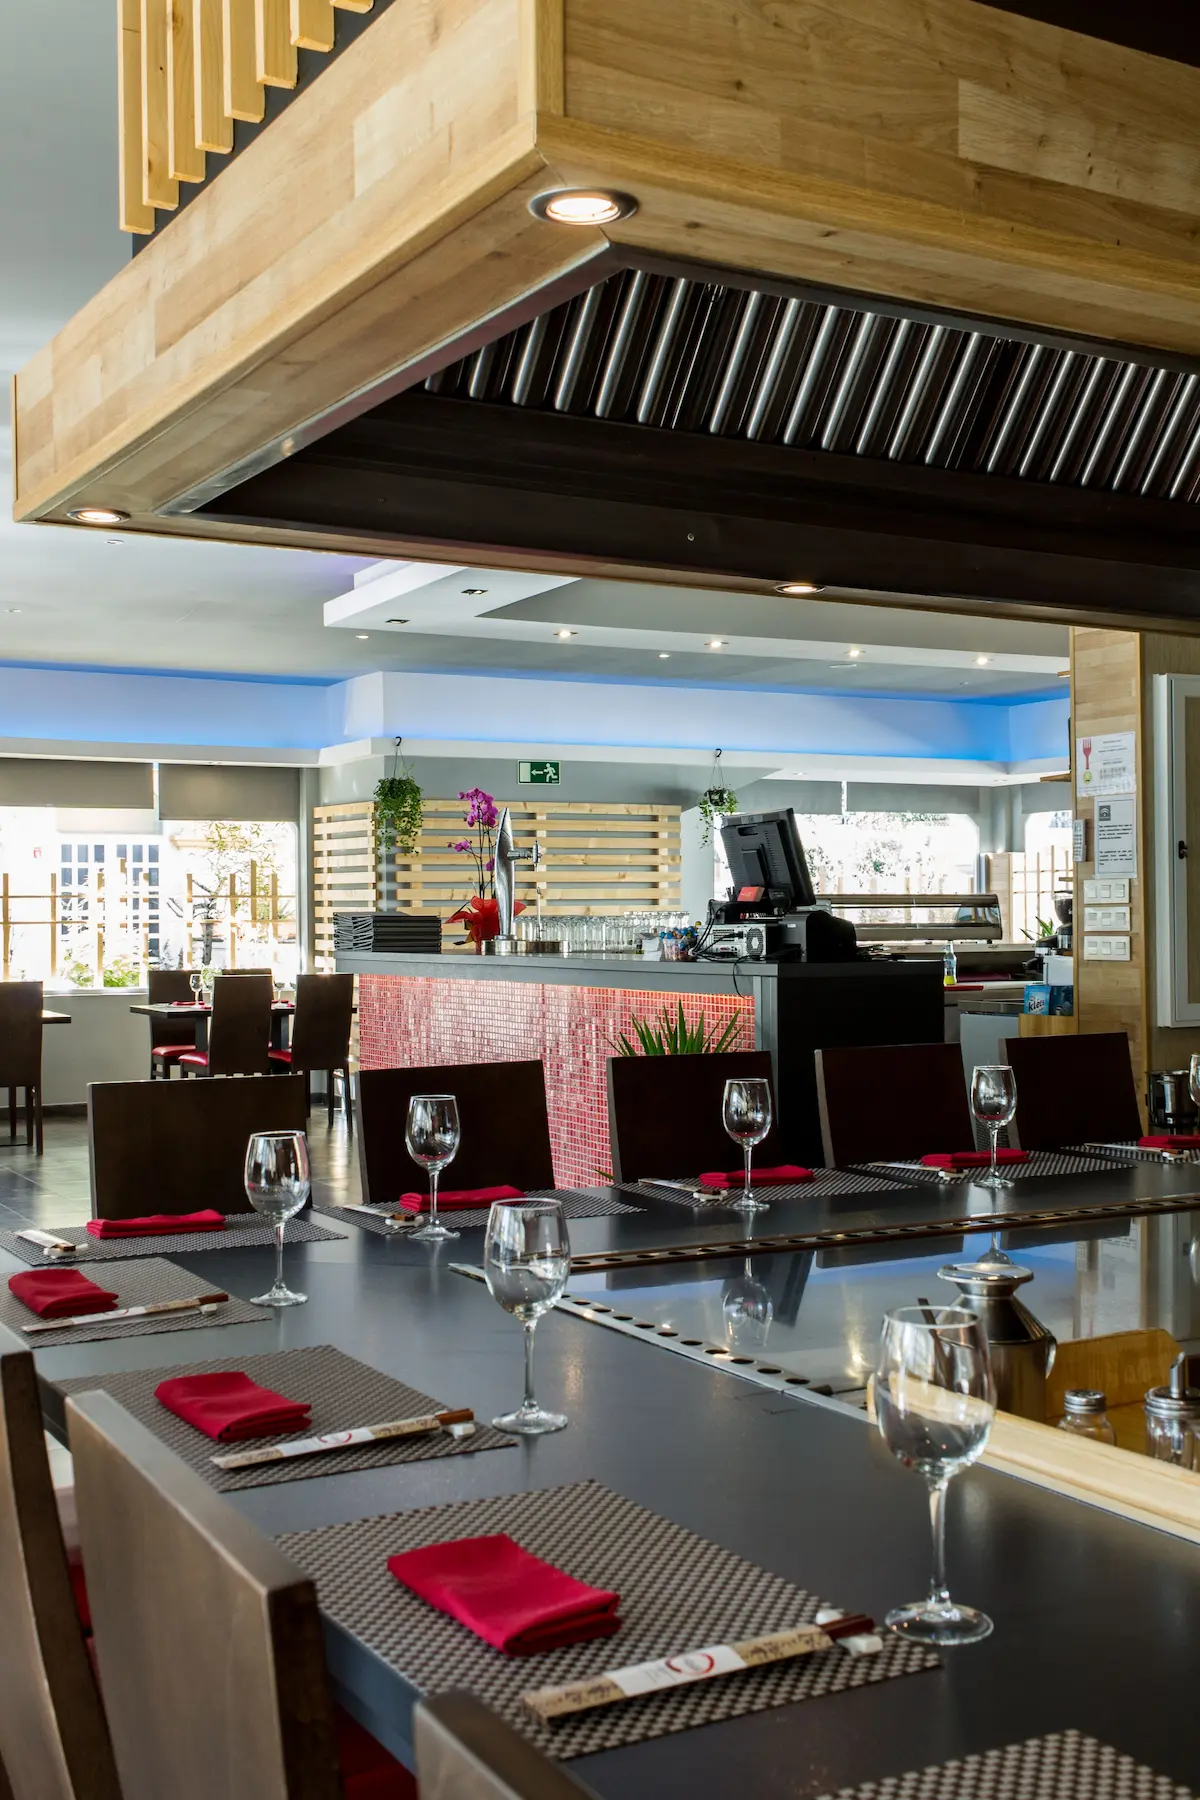 If you're looking for a place with a wide sushi menu, Teppanyaki Kazuki